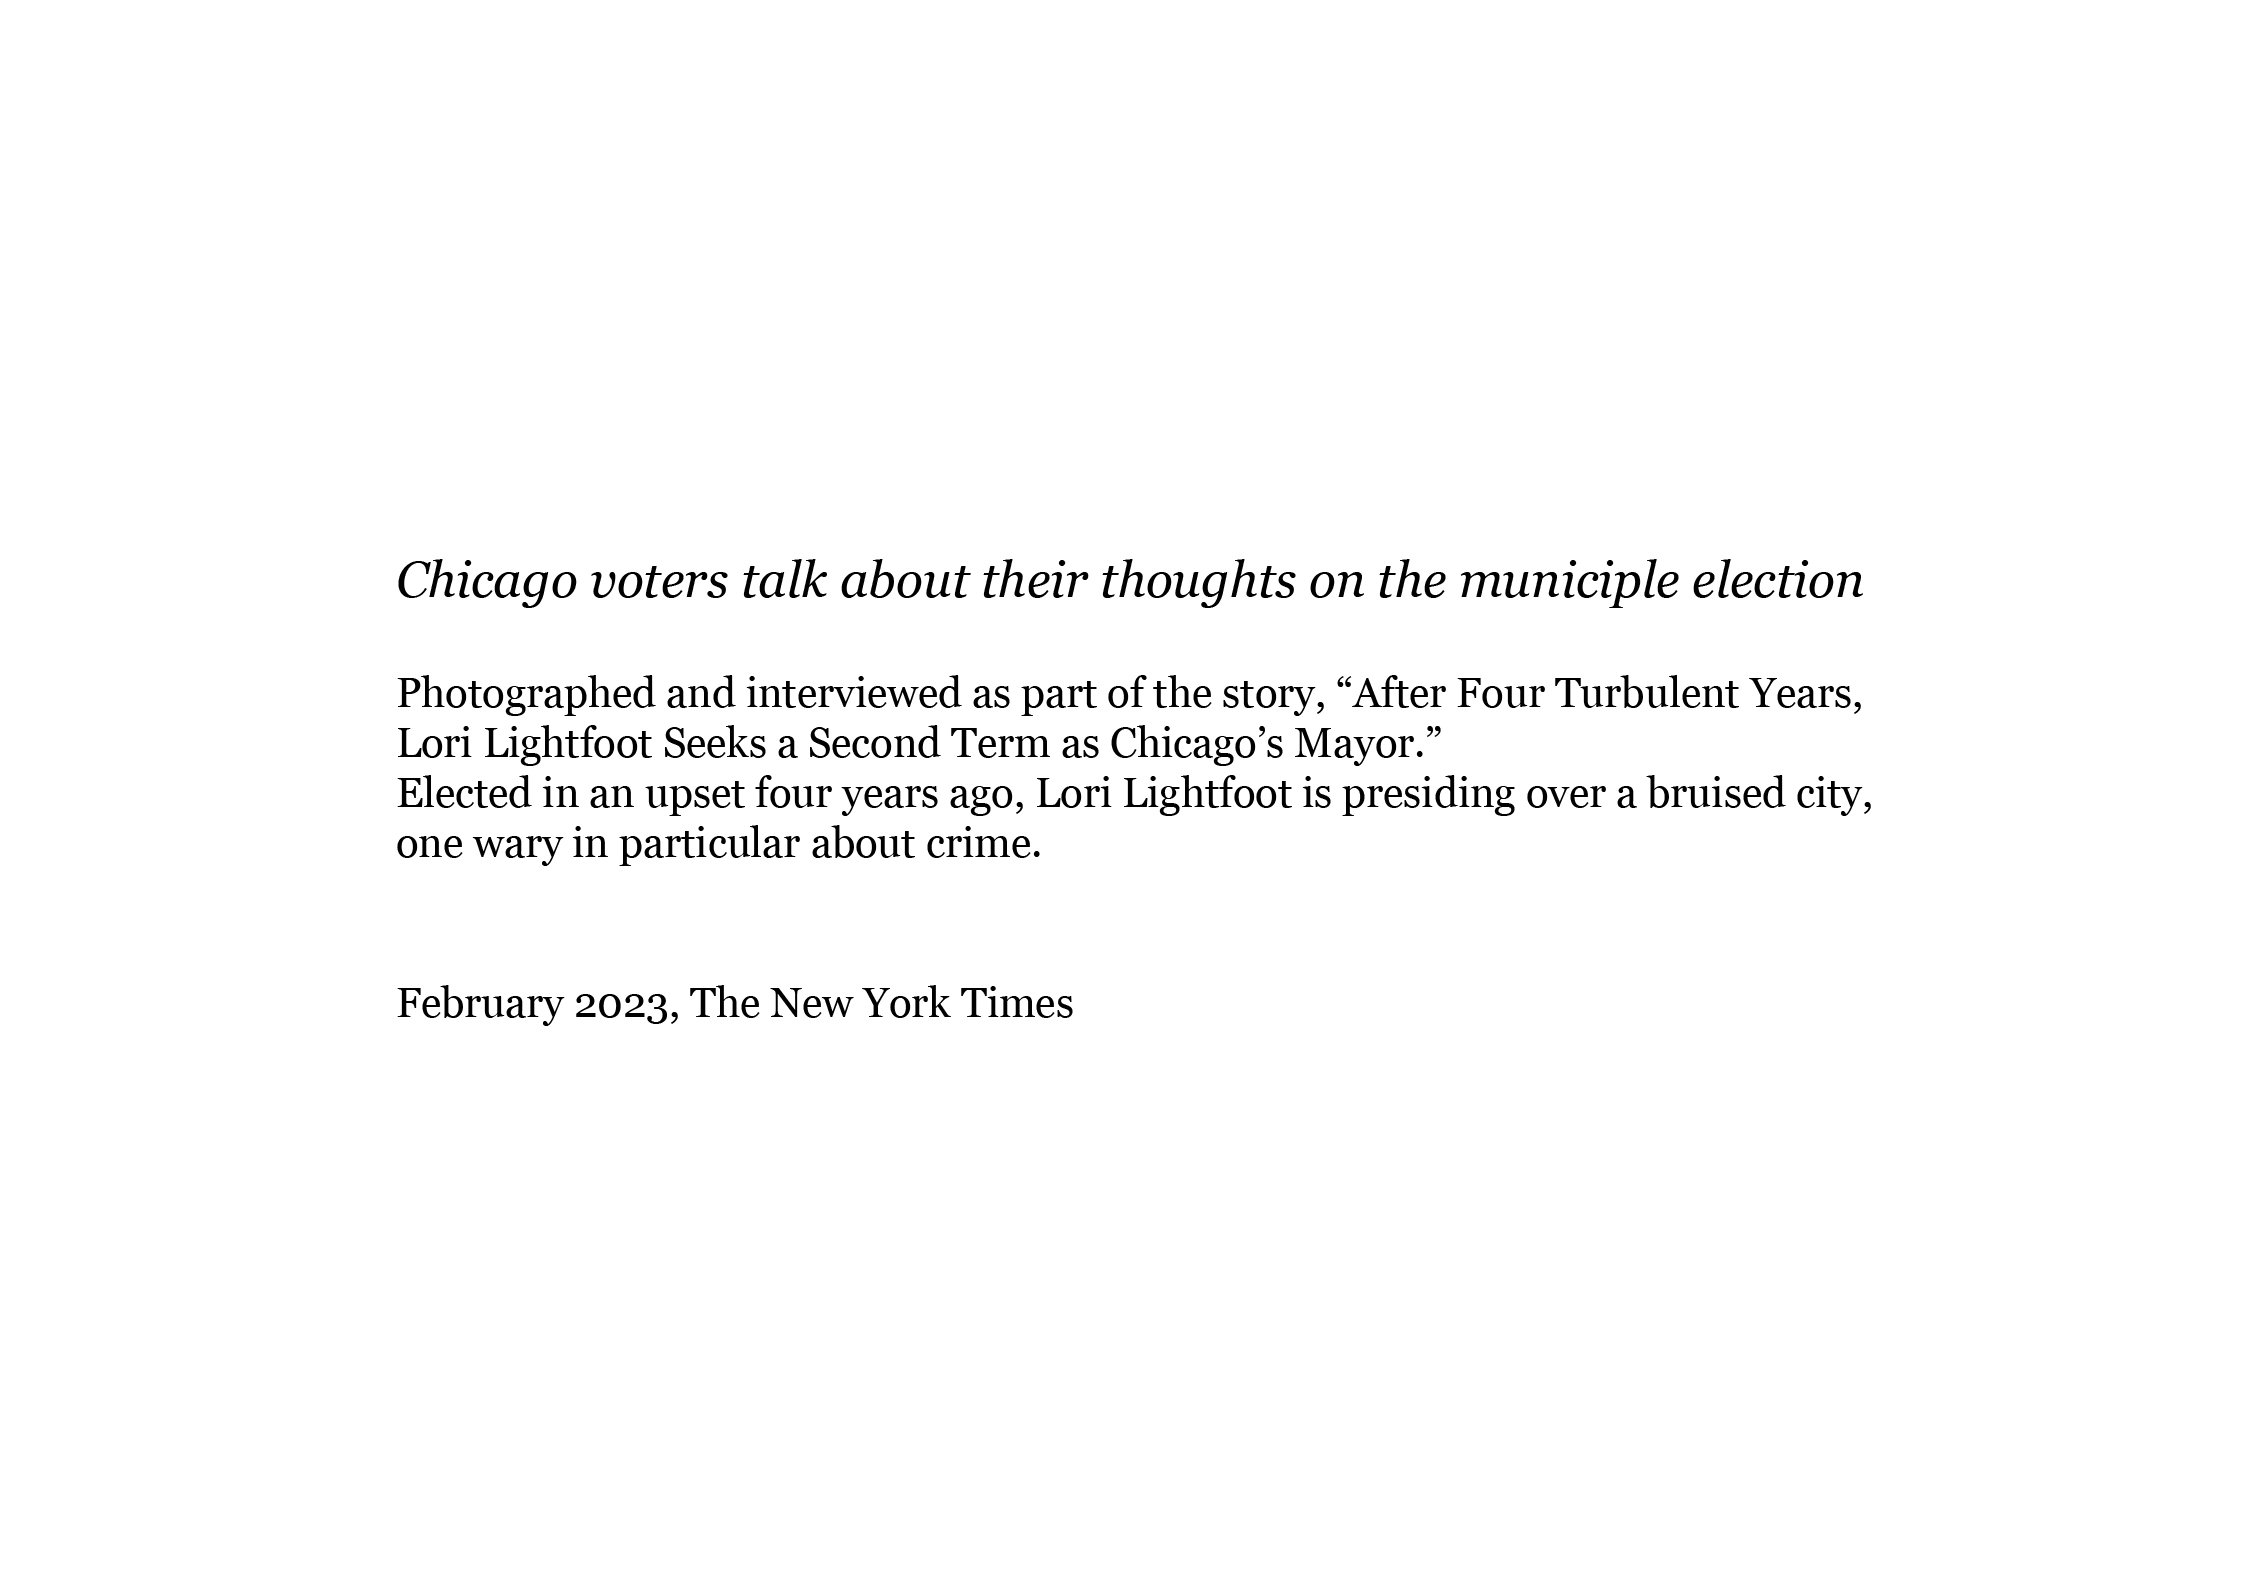  Chicago Voters  The New York Times, 2023  